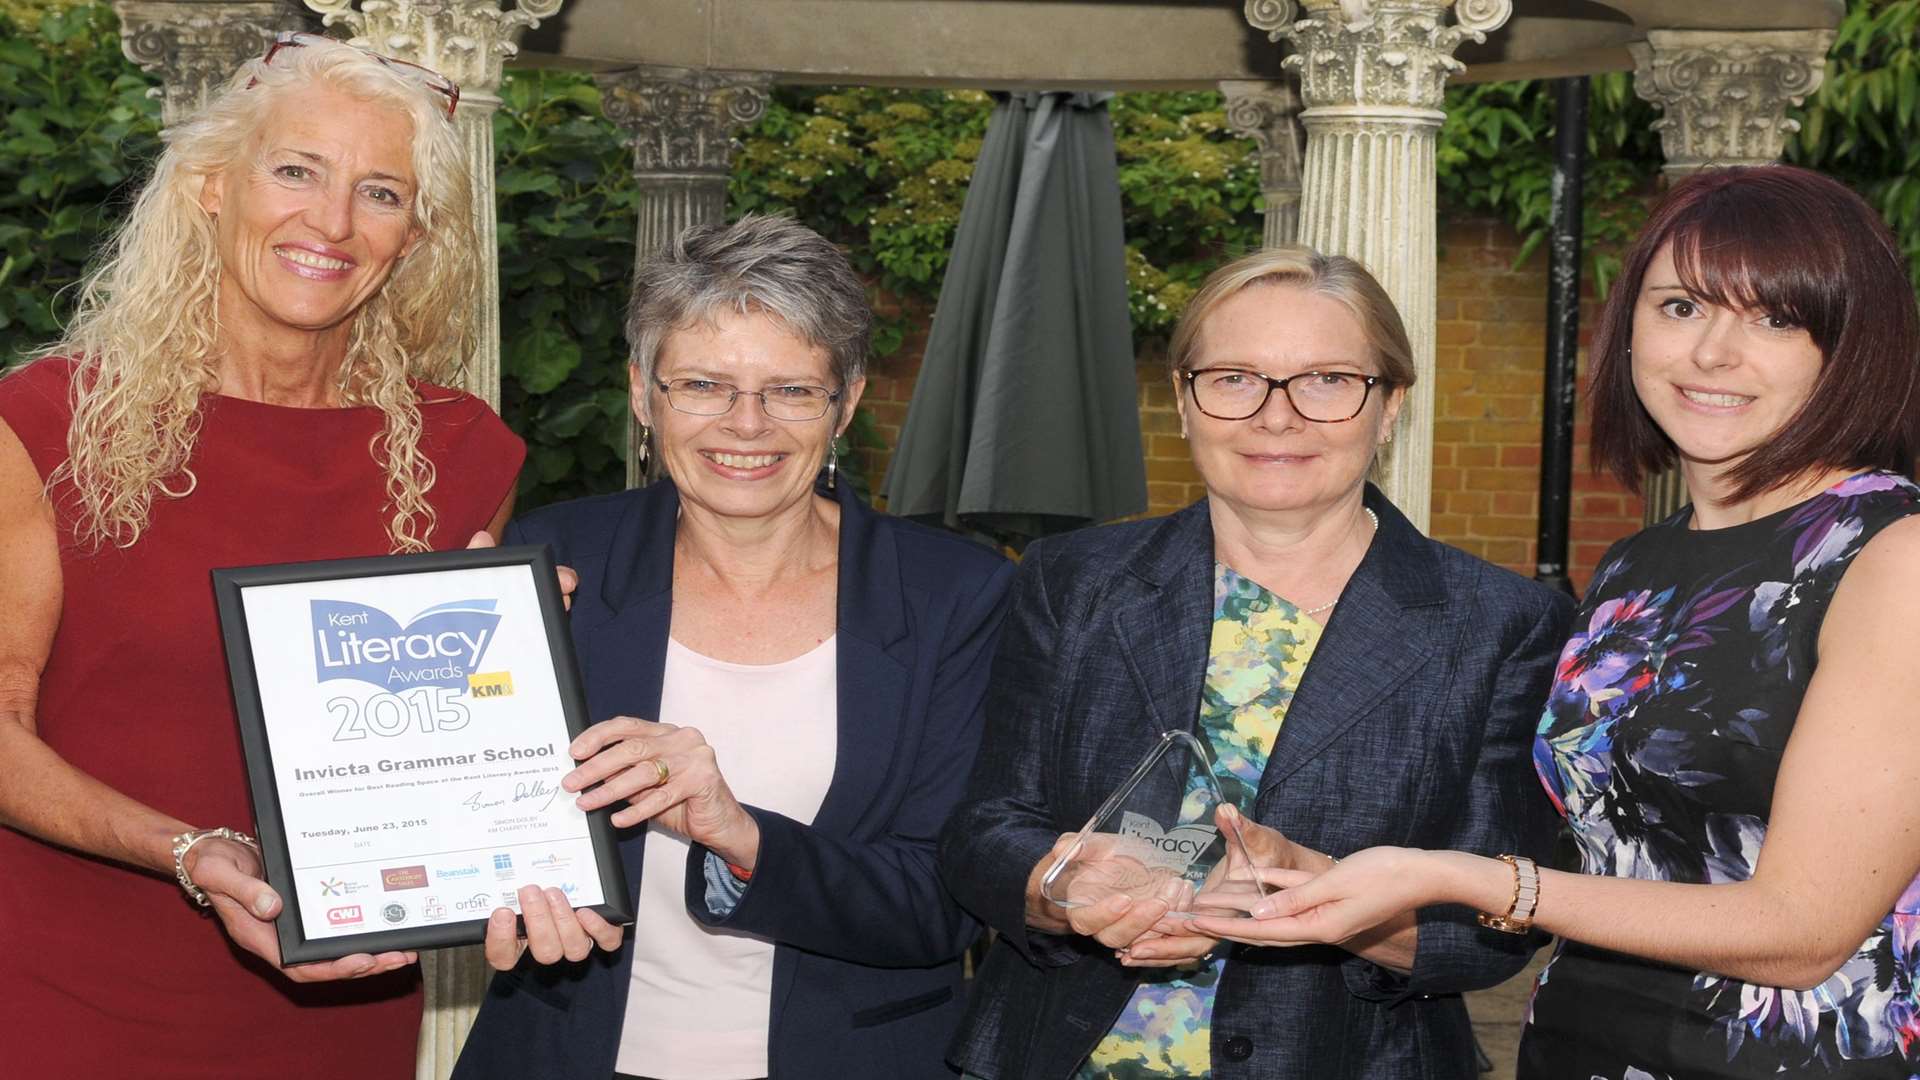 Invite Grammar School celebrate their Kent Literacy Awards win at the 2015 event. Nominations remain open for this year’s awards until April 29.